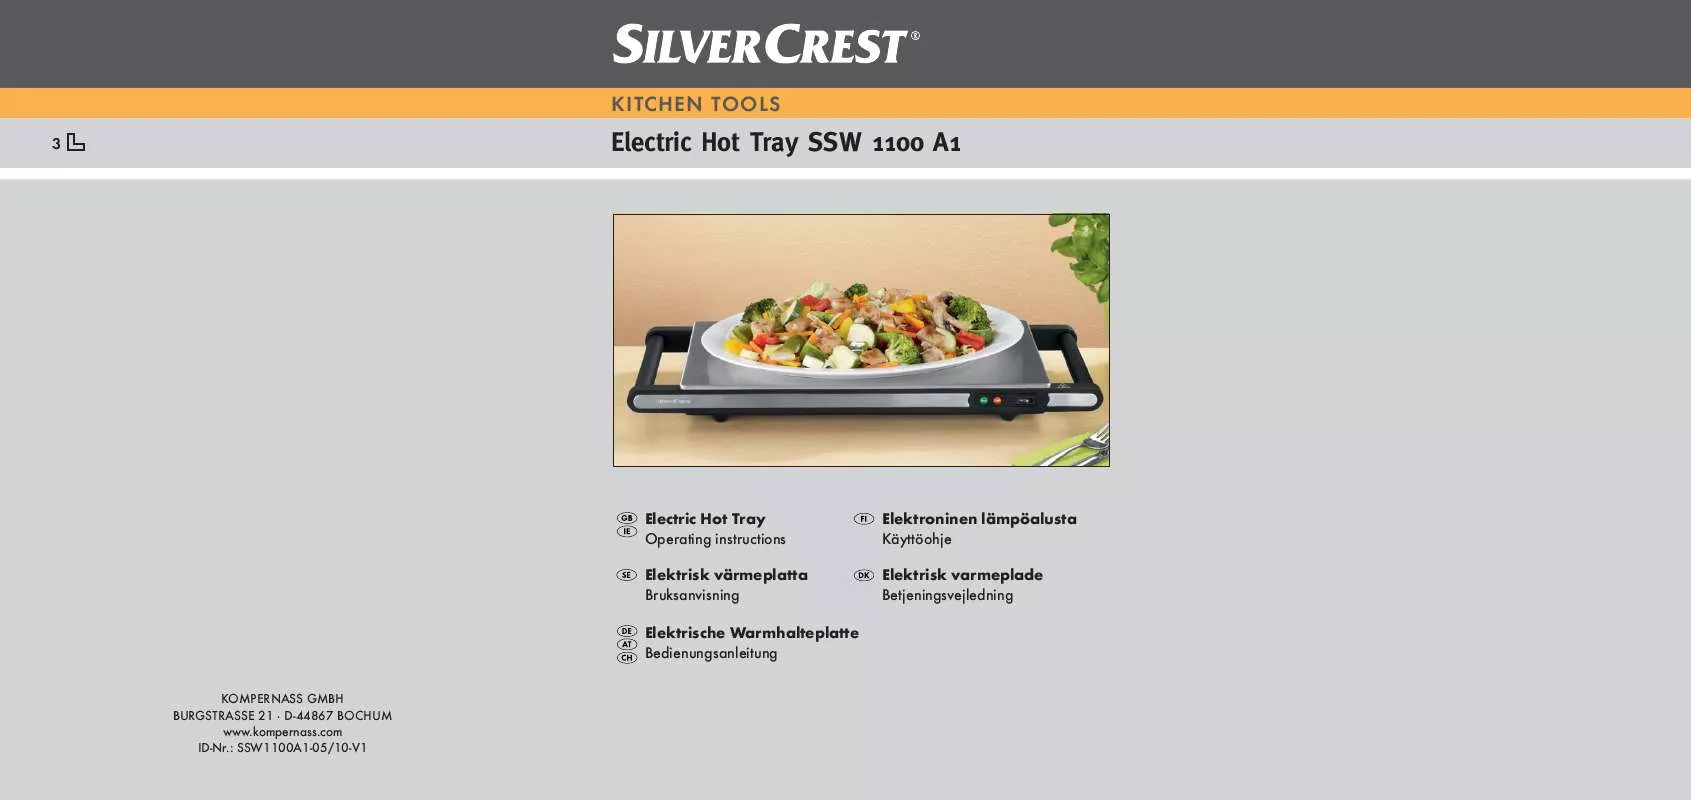 Mode d'emploi SILVERCREST SSW 1100 A1 ELECTRIC HOT TRAY